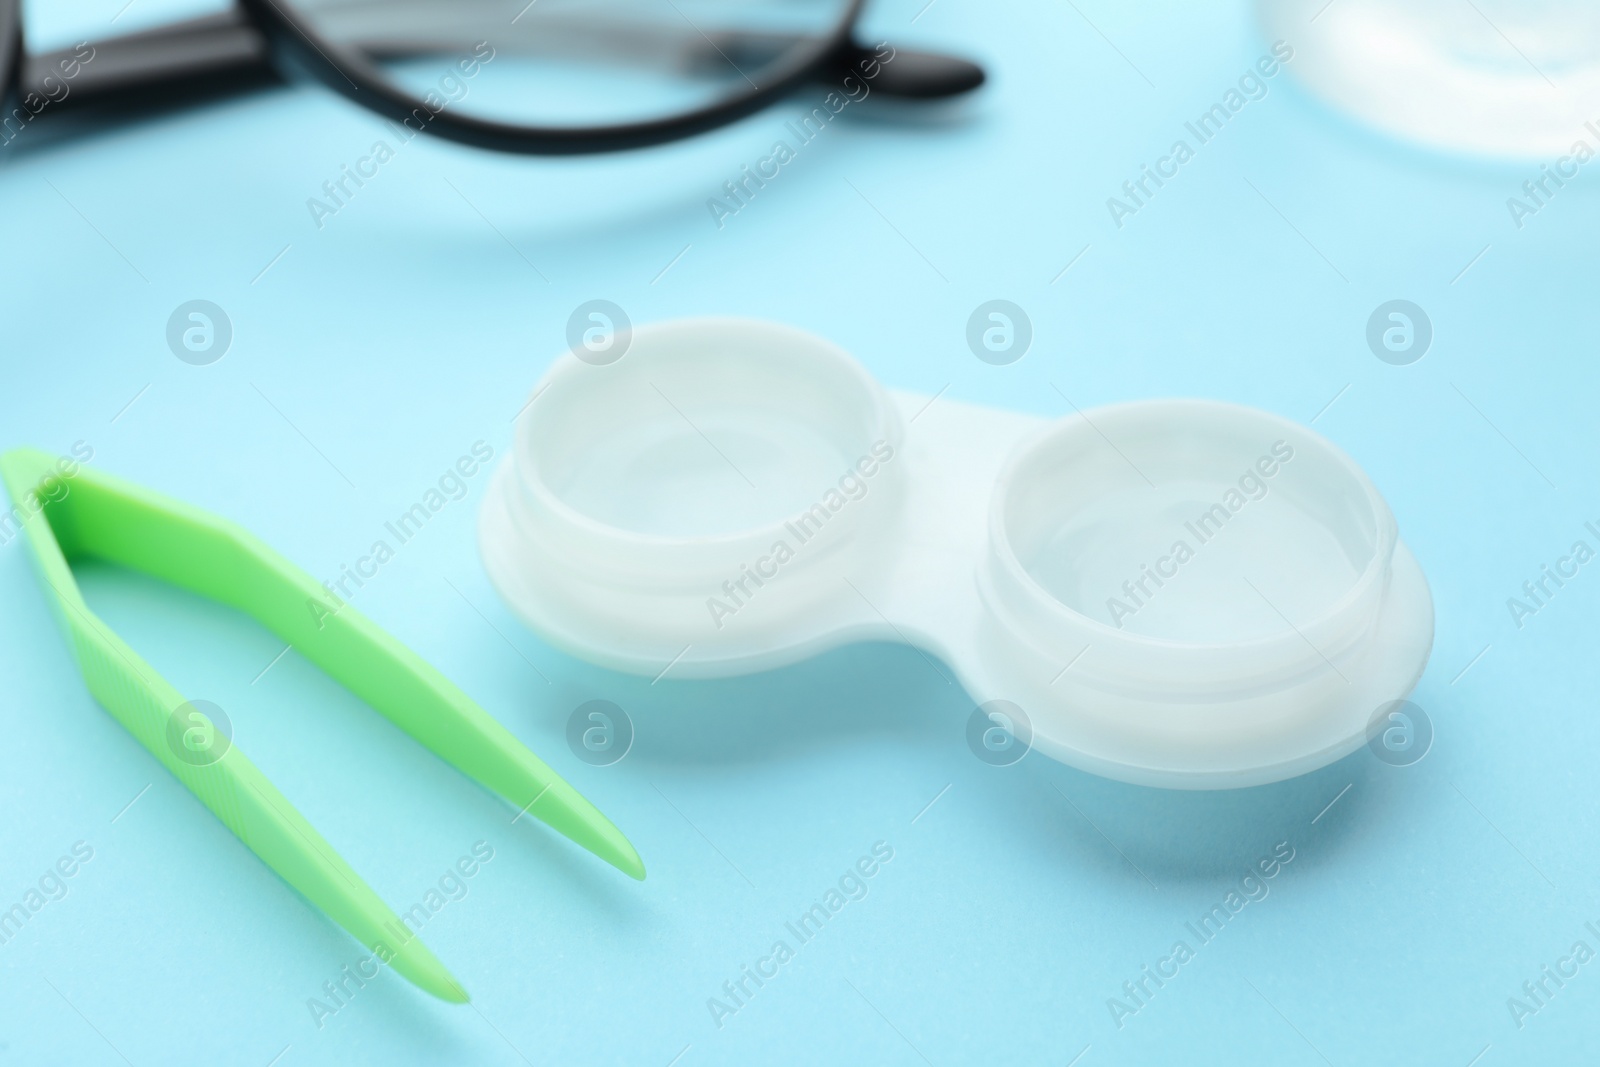 Photo of Case with contact lenses and tweezers on light blue background, closeup